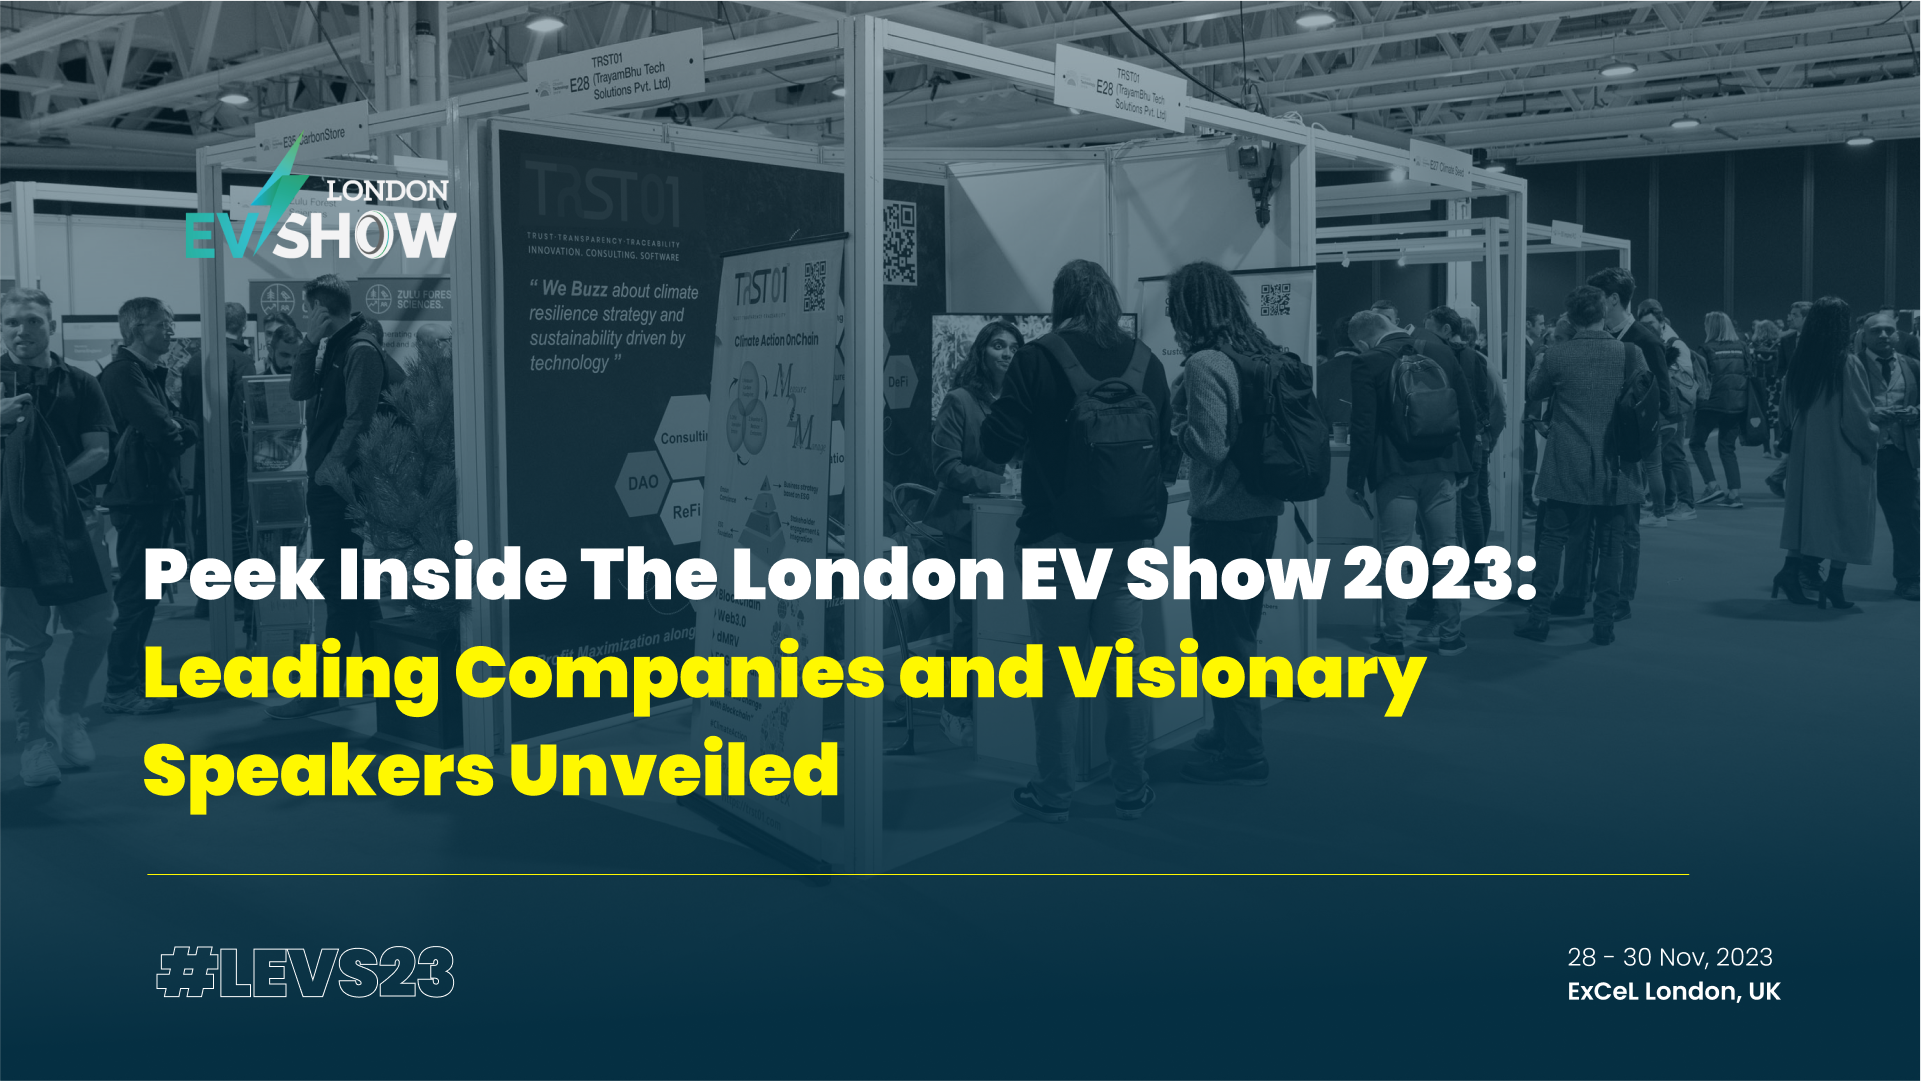 Peek Inside The London EV Show 2023: Leading Companies and Visionary Speakers Unveiled